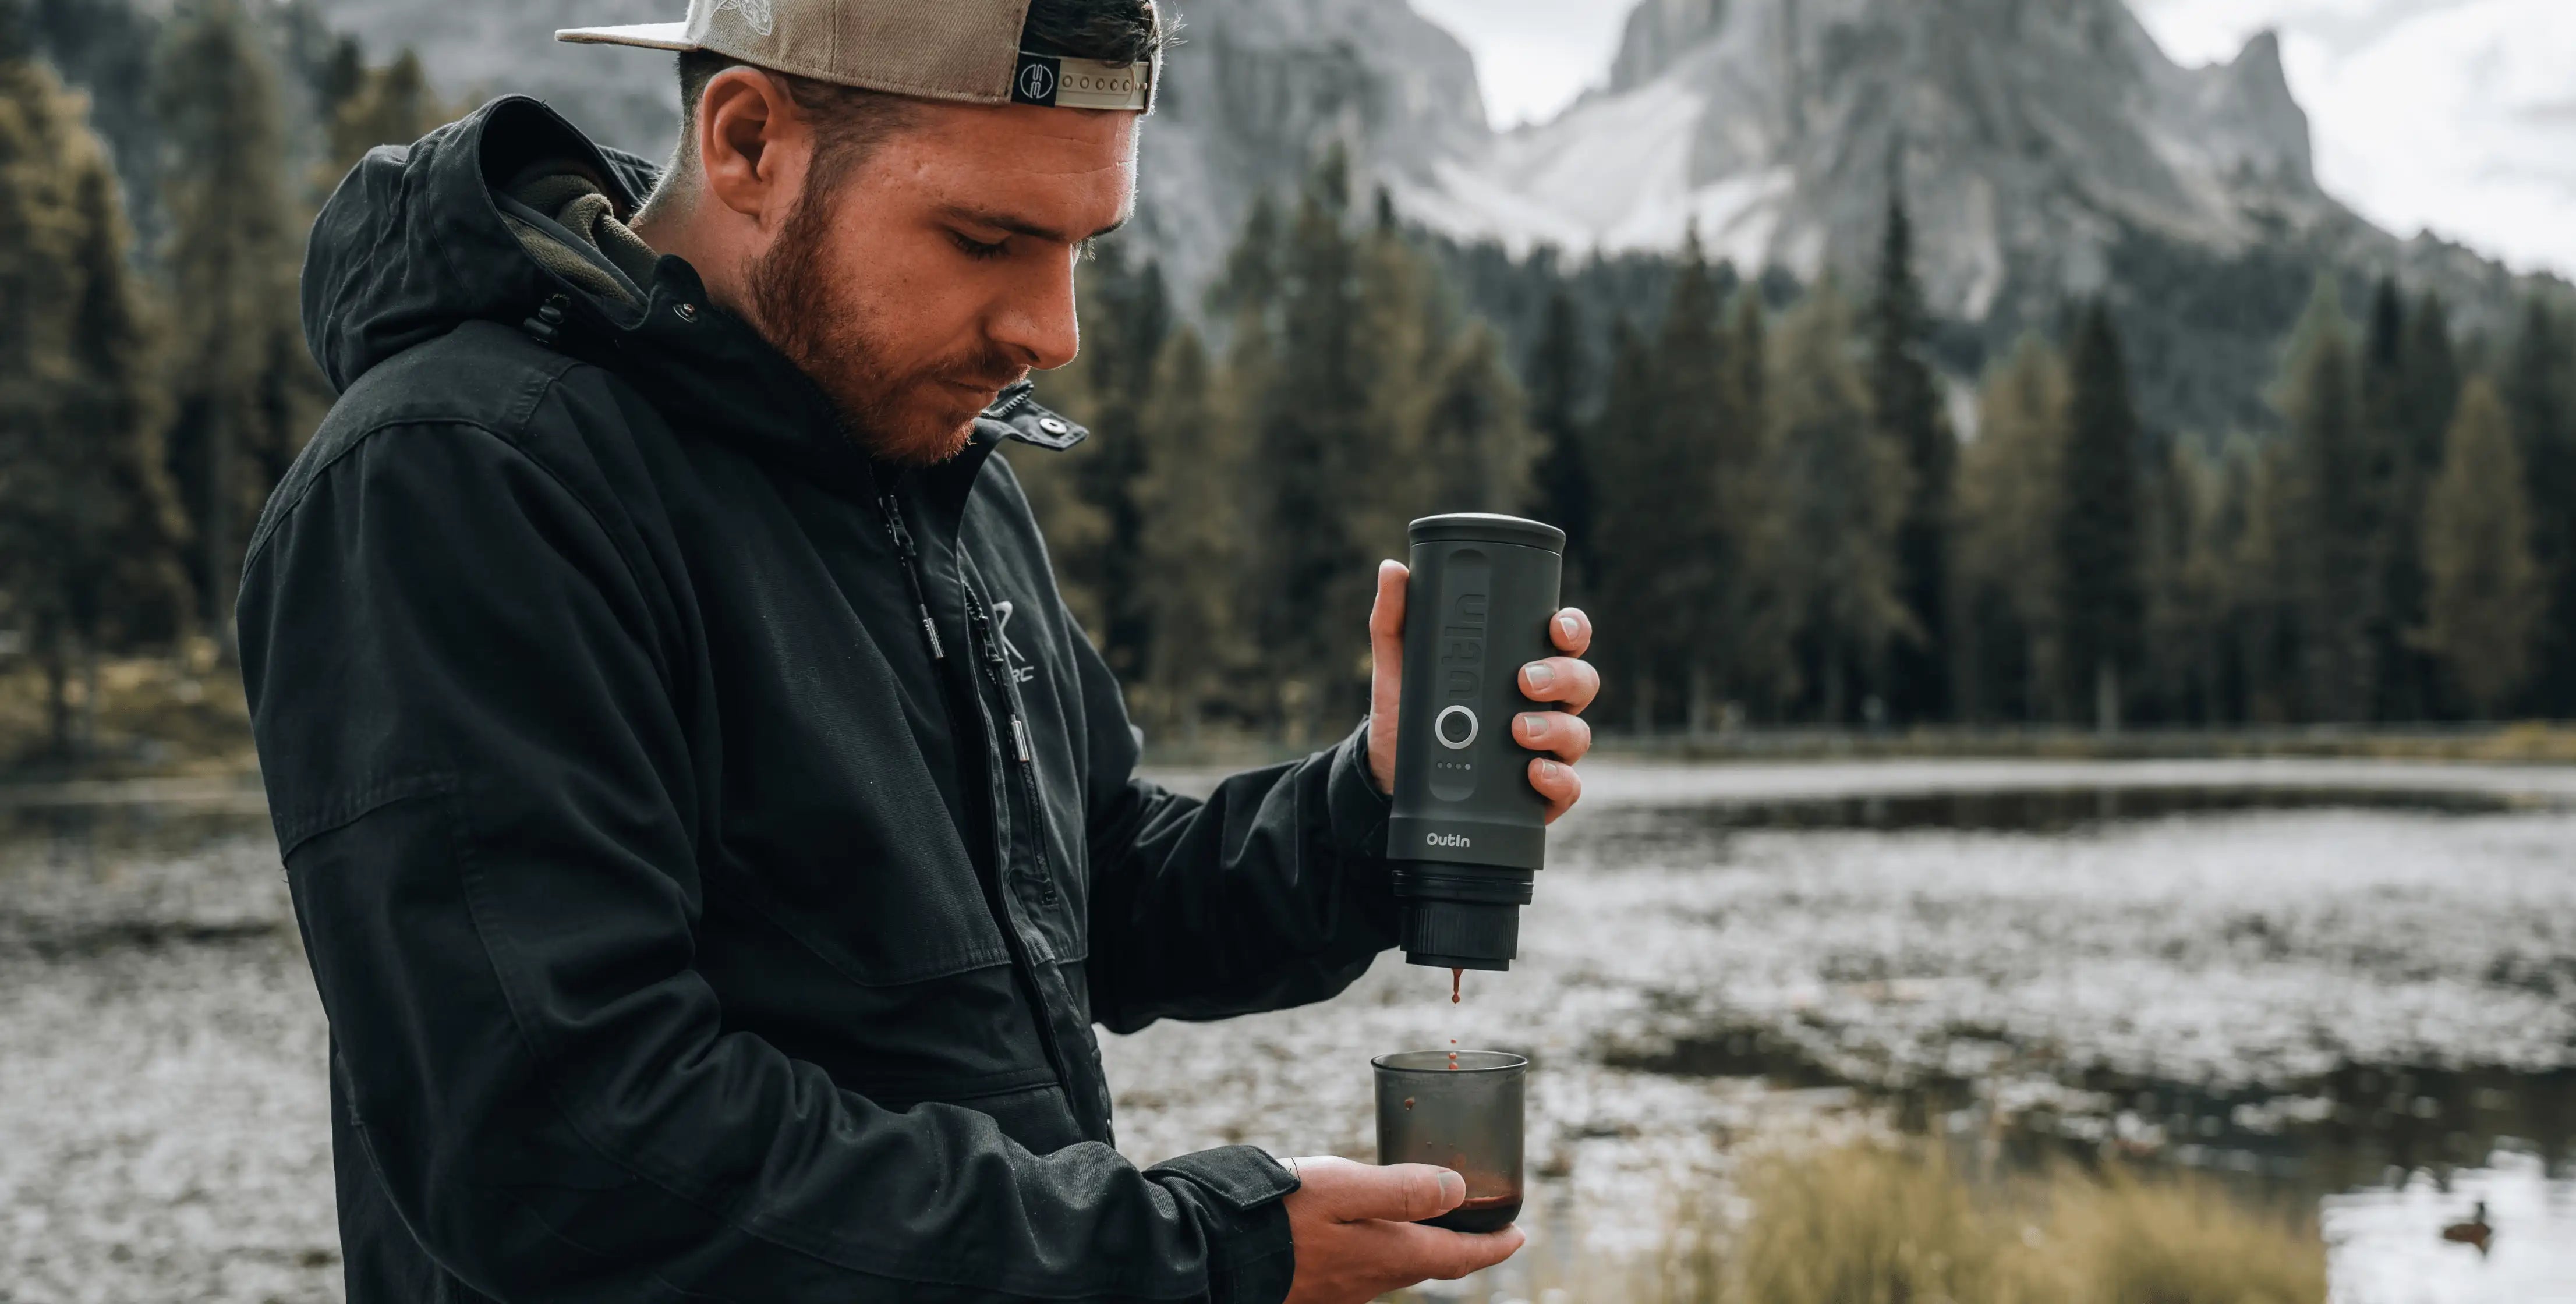 This Portable Espresso Maker is a Must-Have For Your Outdoor